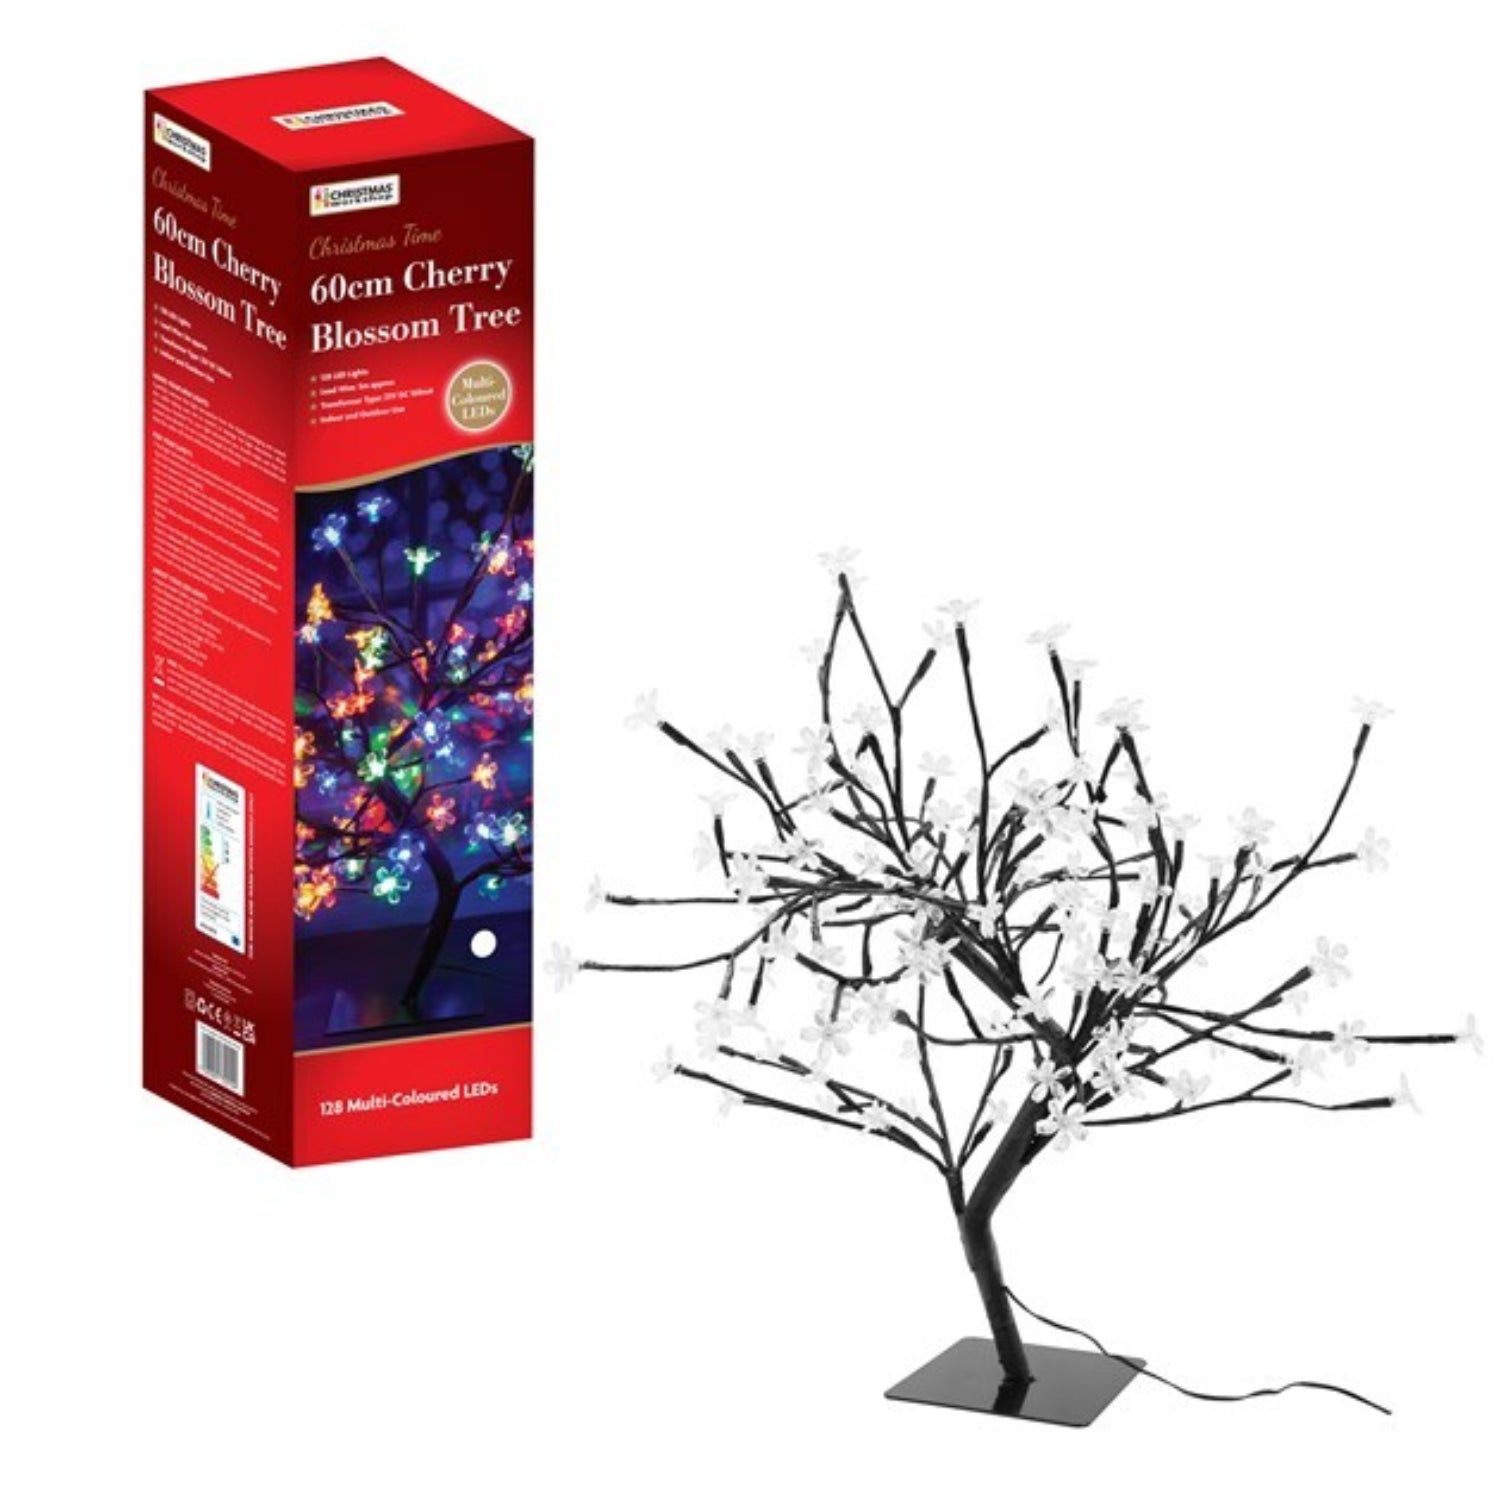 60cm Cherry Blossom Christmas Tree with 128 Colourful LED Lights